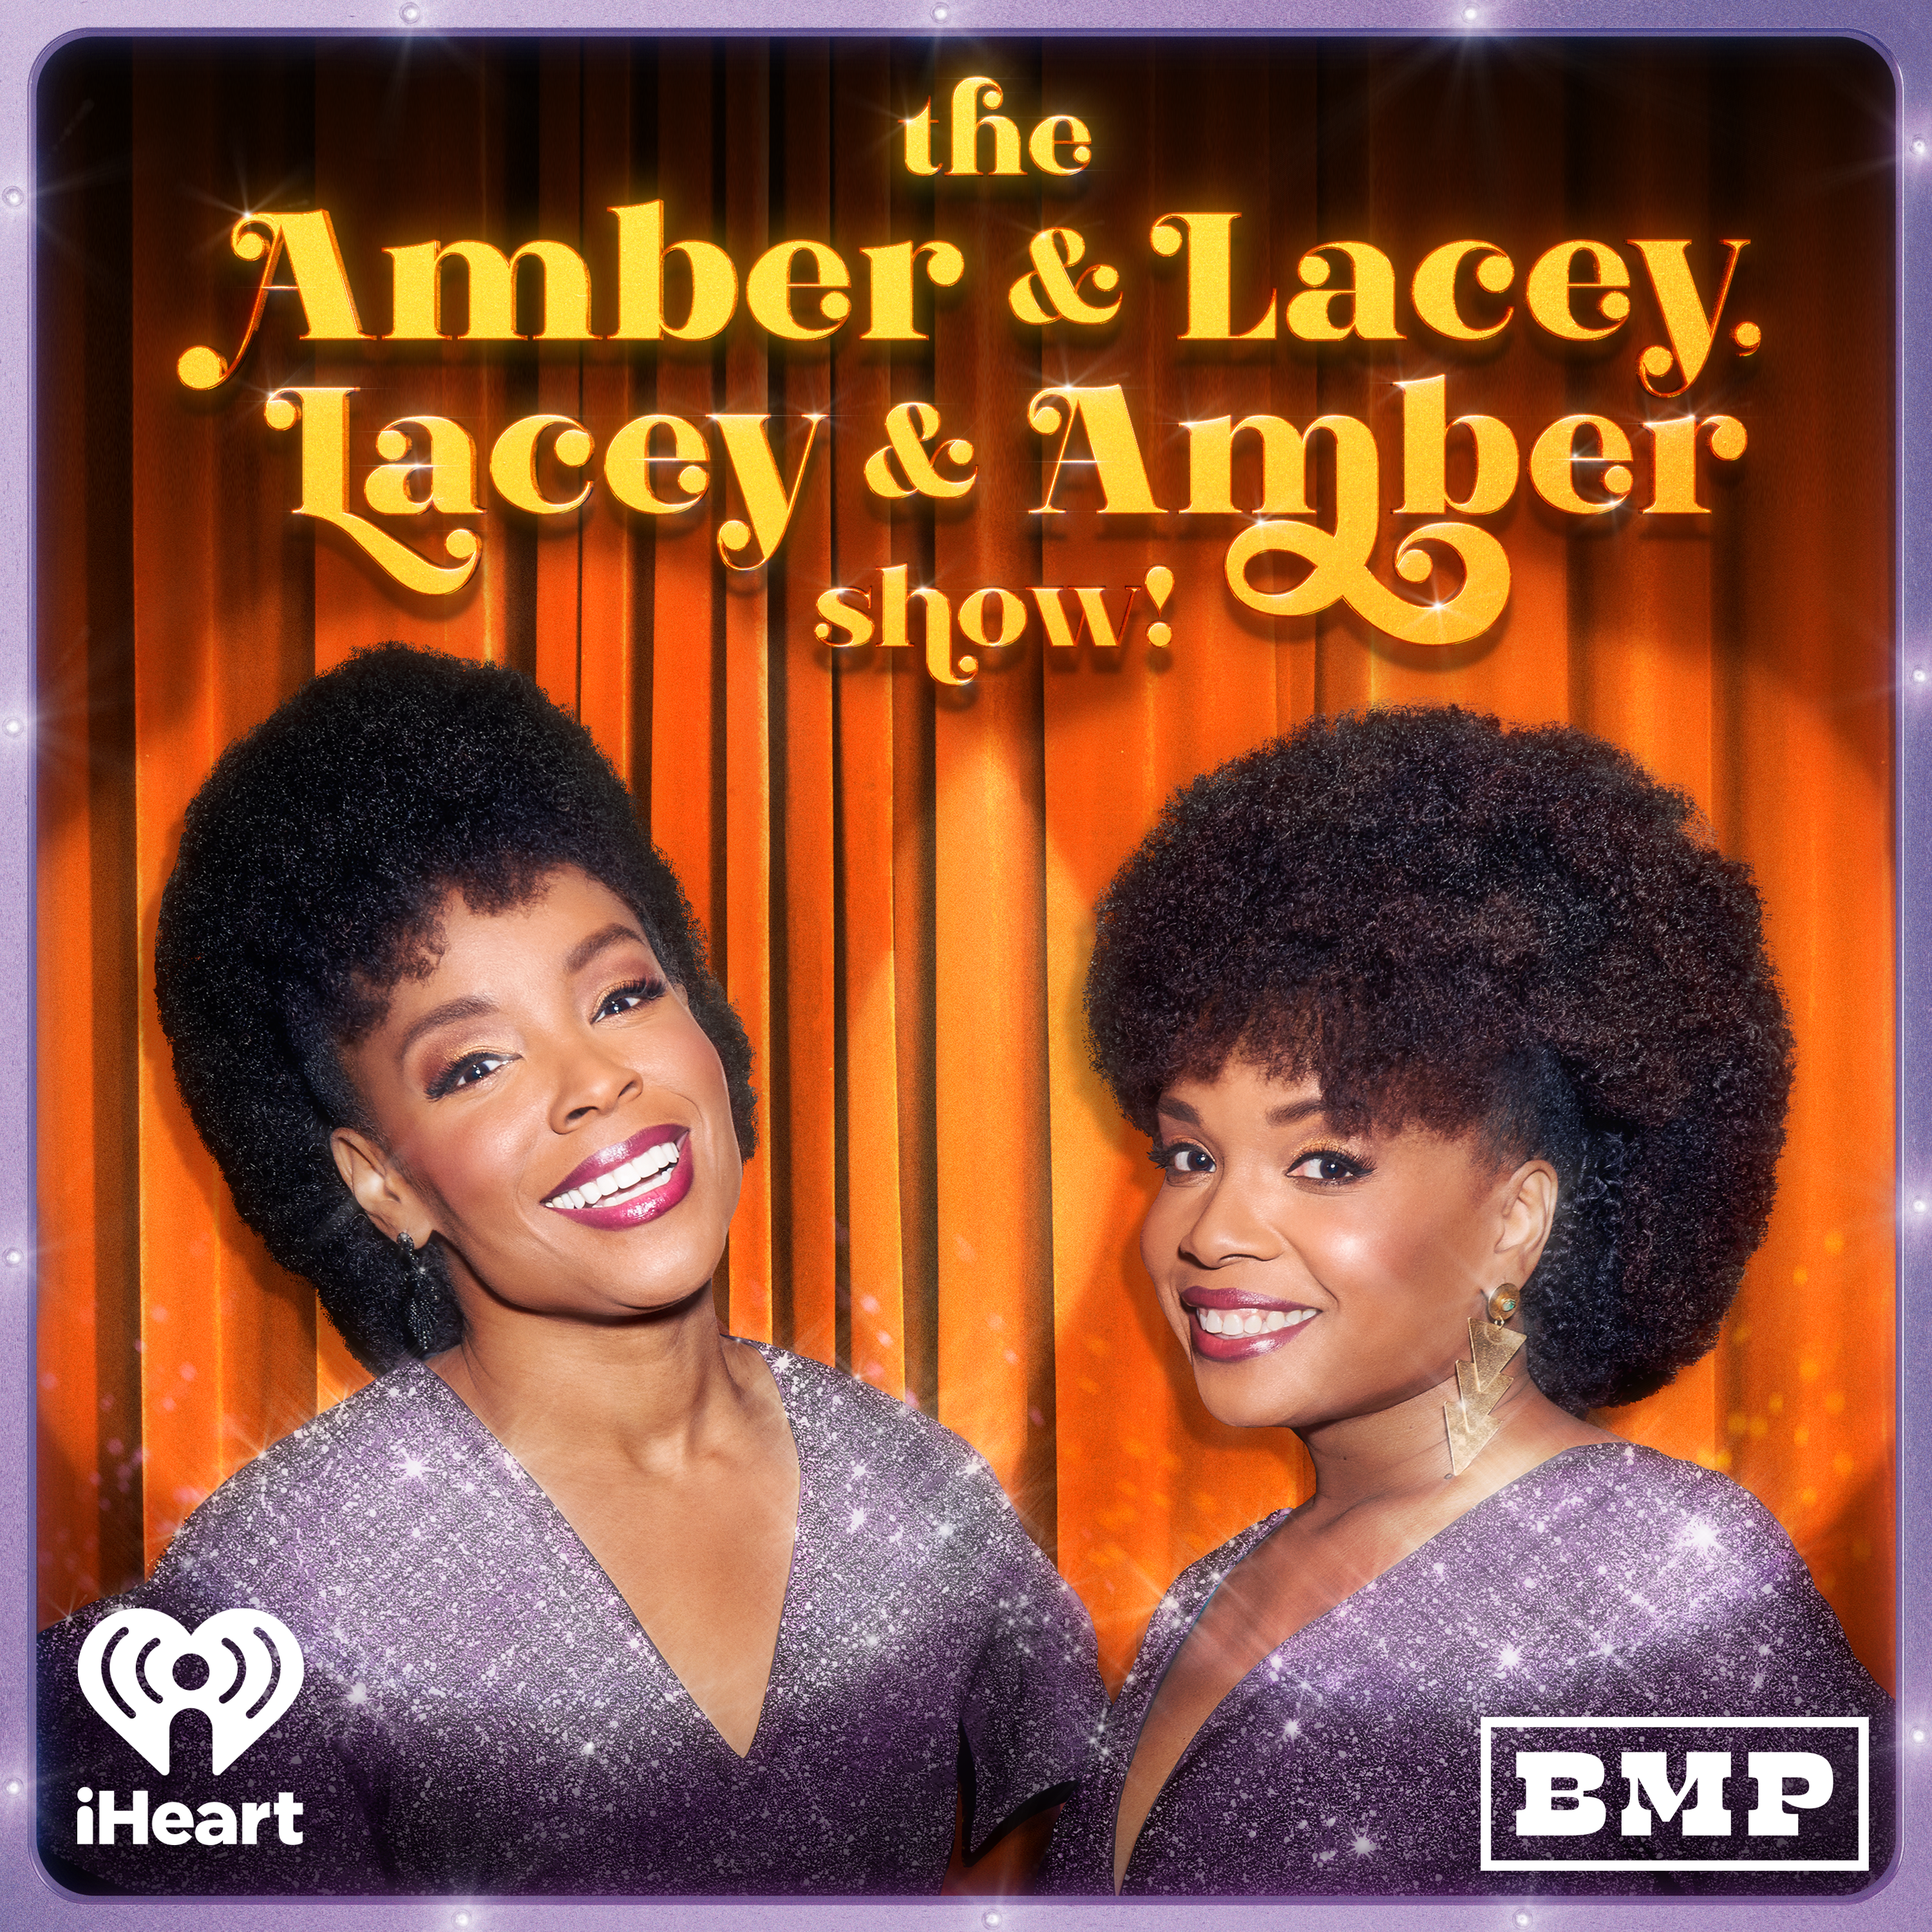 Dead Mouse & A Dead Man: This Week's Unbelievable Story From Amber Ruffin & Lacey Lamar